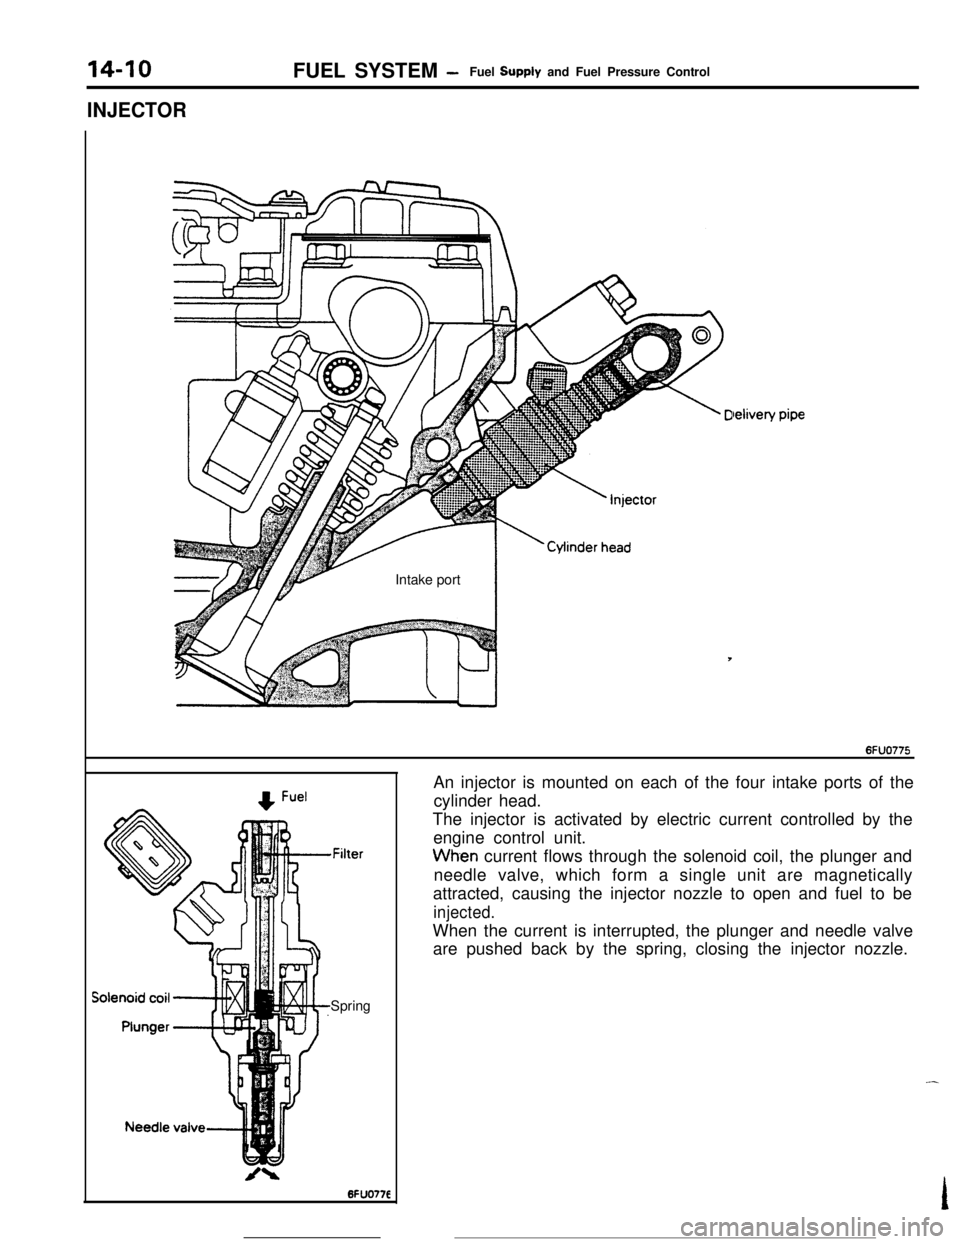 MITSUBISHI ECLIPSE 1990  Service Manual 14-10
INJECTORFUEL SYSTEM 
-Fuel Supply and Fuel Pressure Control
Intake port
lelivelYPipte
,FilterSpringAn injector is mounted on each of the four intake ports of the
cylinder head.
The injector is a